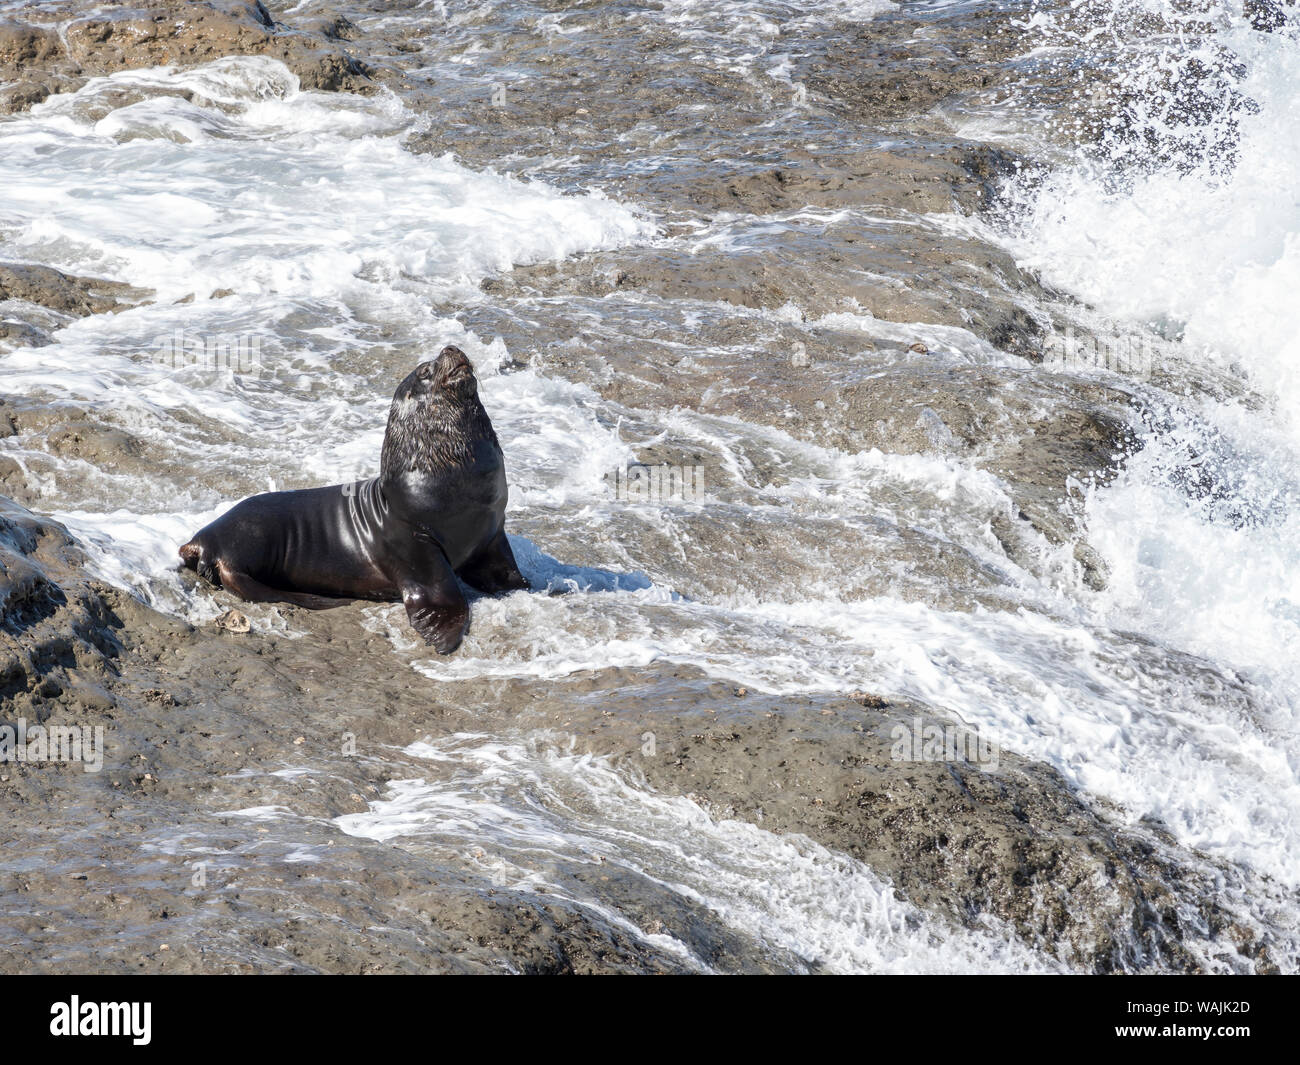 South American sea lion (Otaria flavescens) also called Southern Sea Lion and Patagonian Sea Lion, colony in the Valdes National Park. Valdes is listed as UNESCO World Heritage Site. South America, Argentina, Chubut Stock Photo